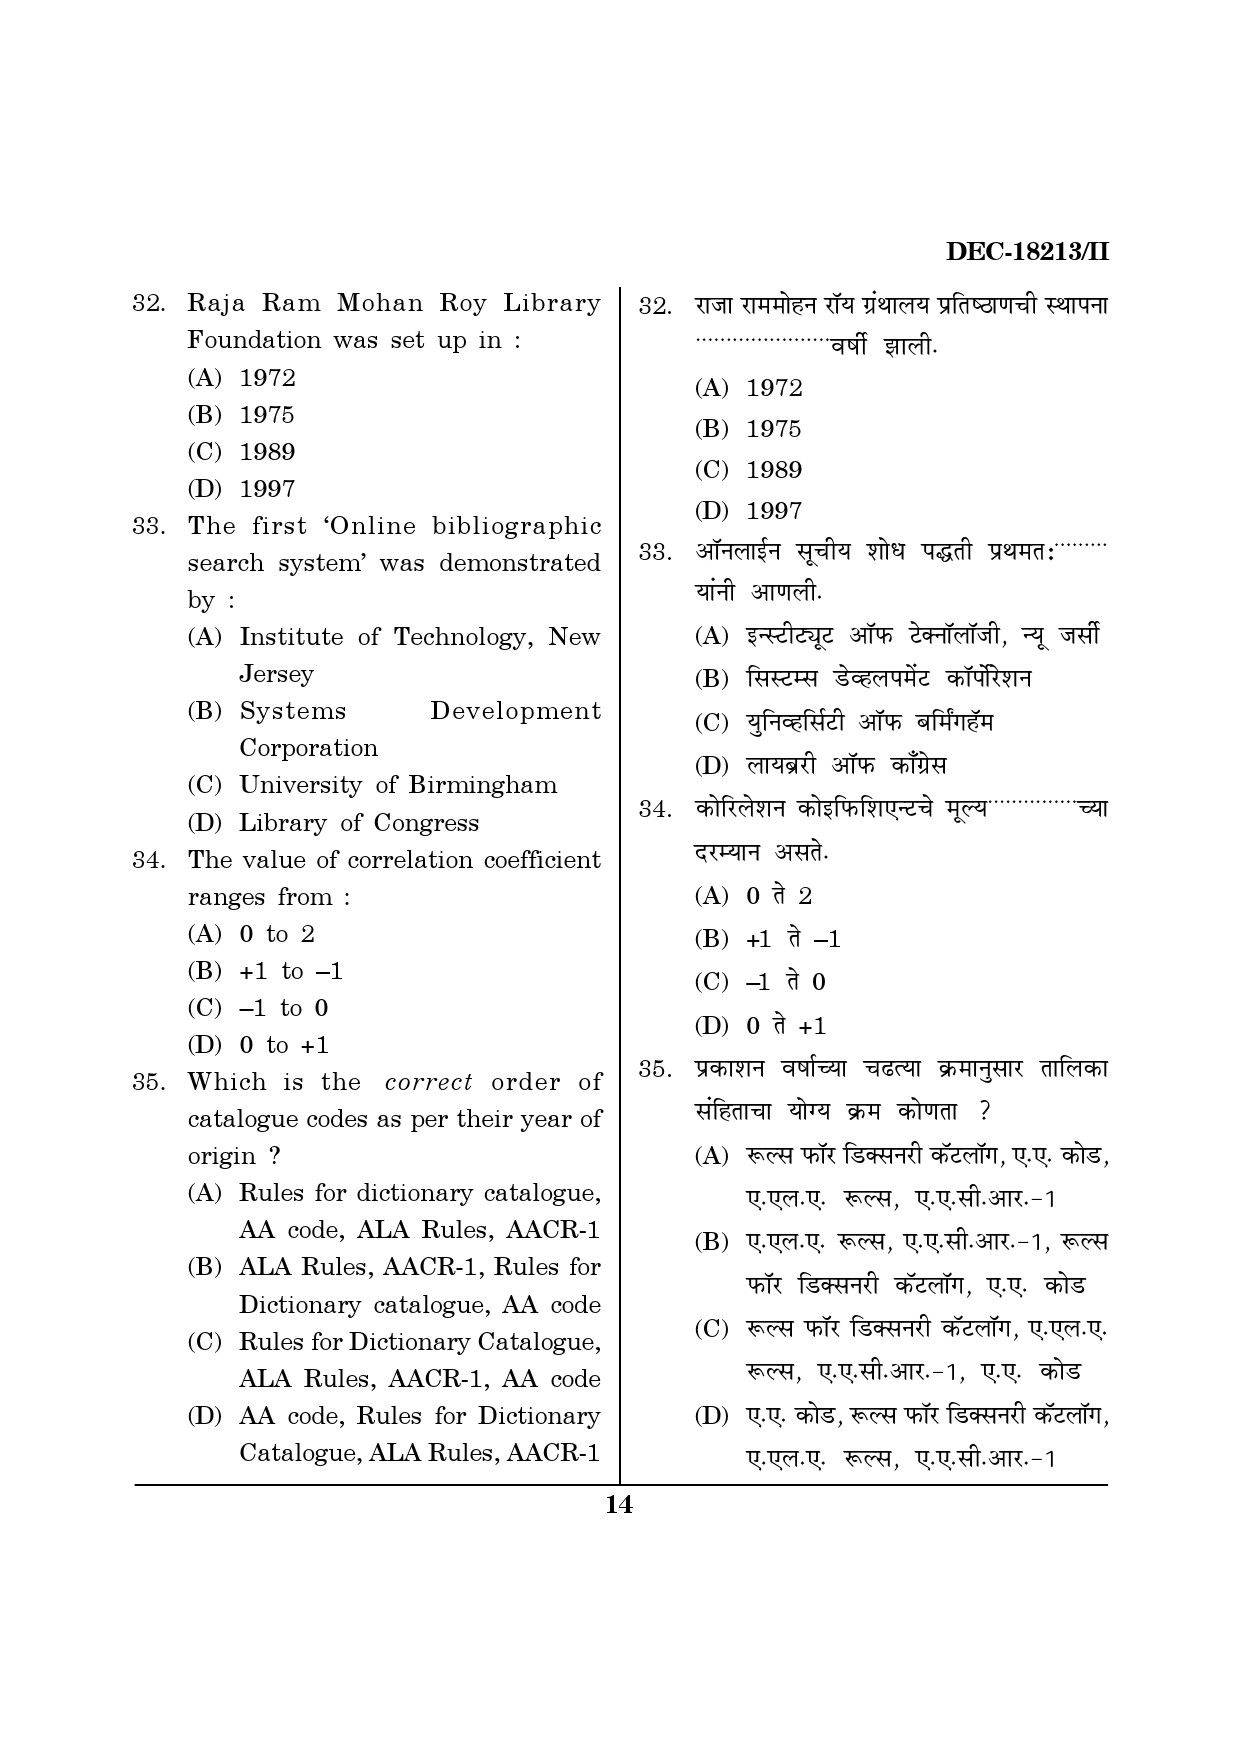 Maharashtra SET Library Information Science Question Paper II December 2013 13